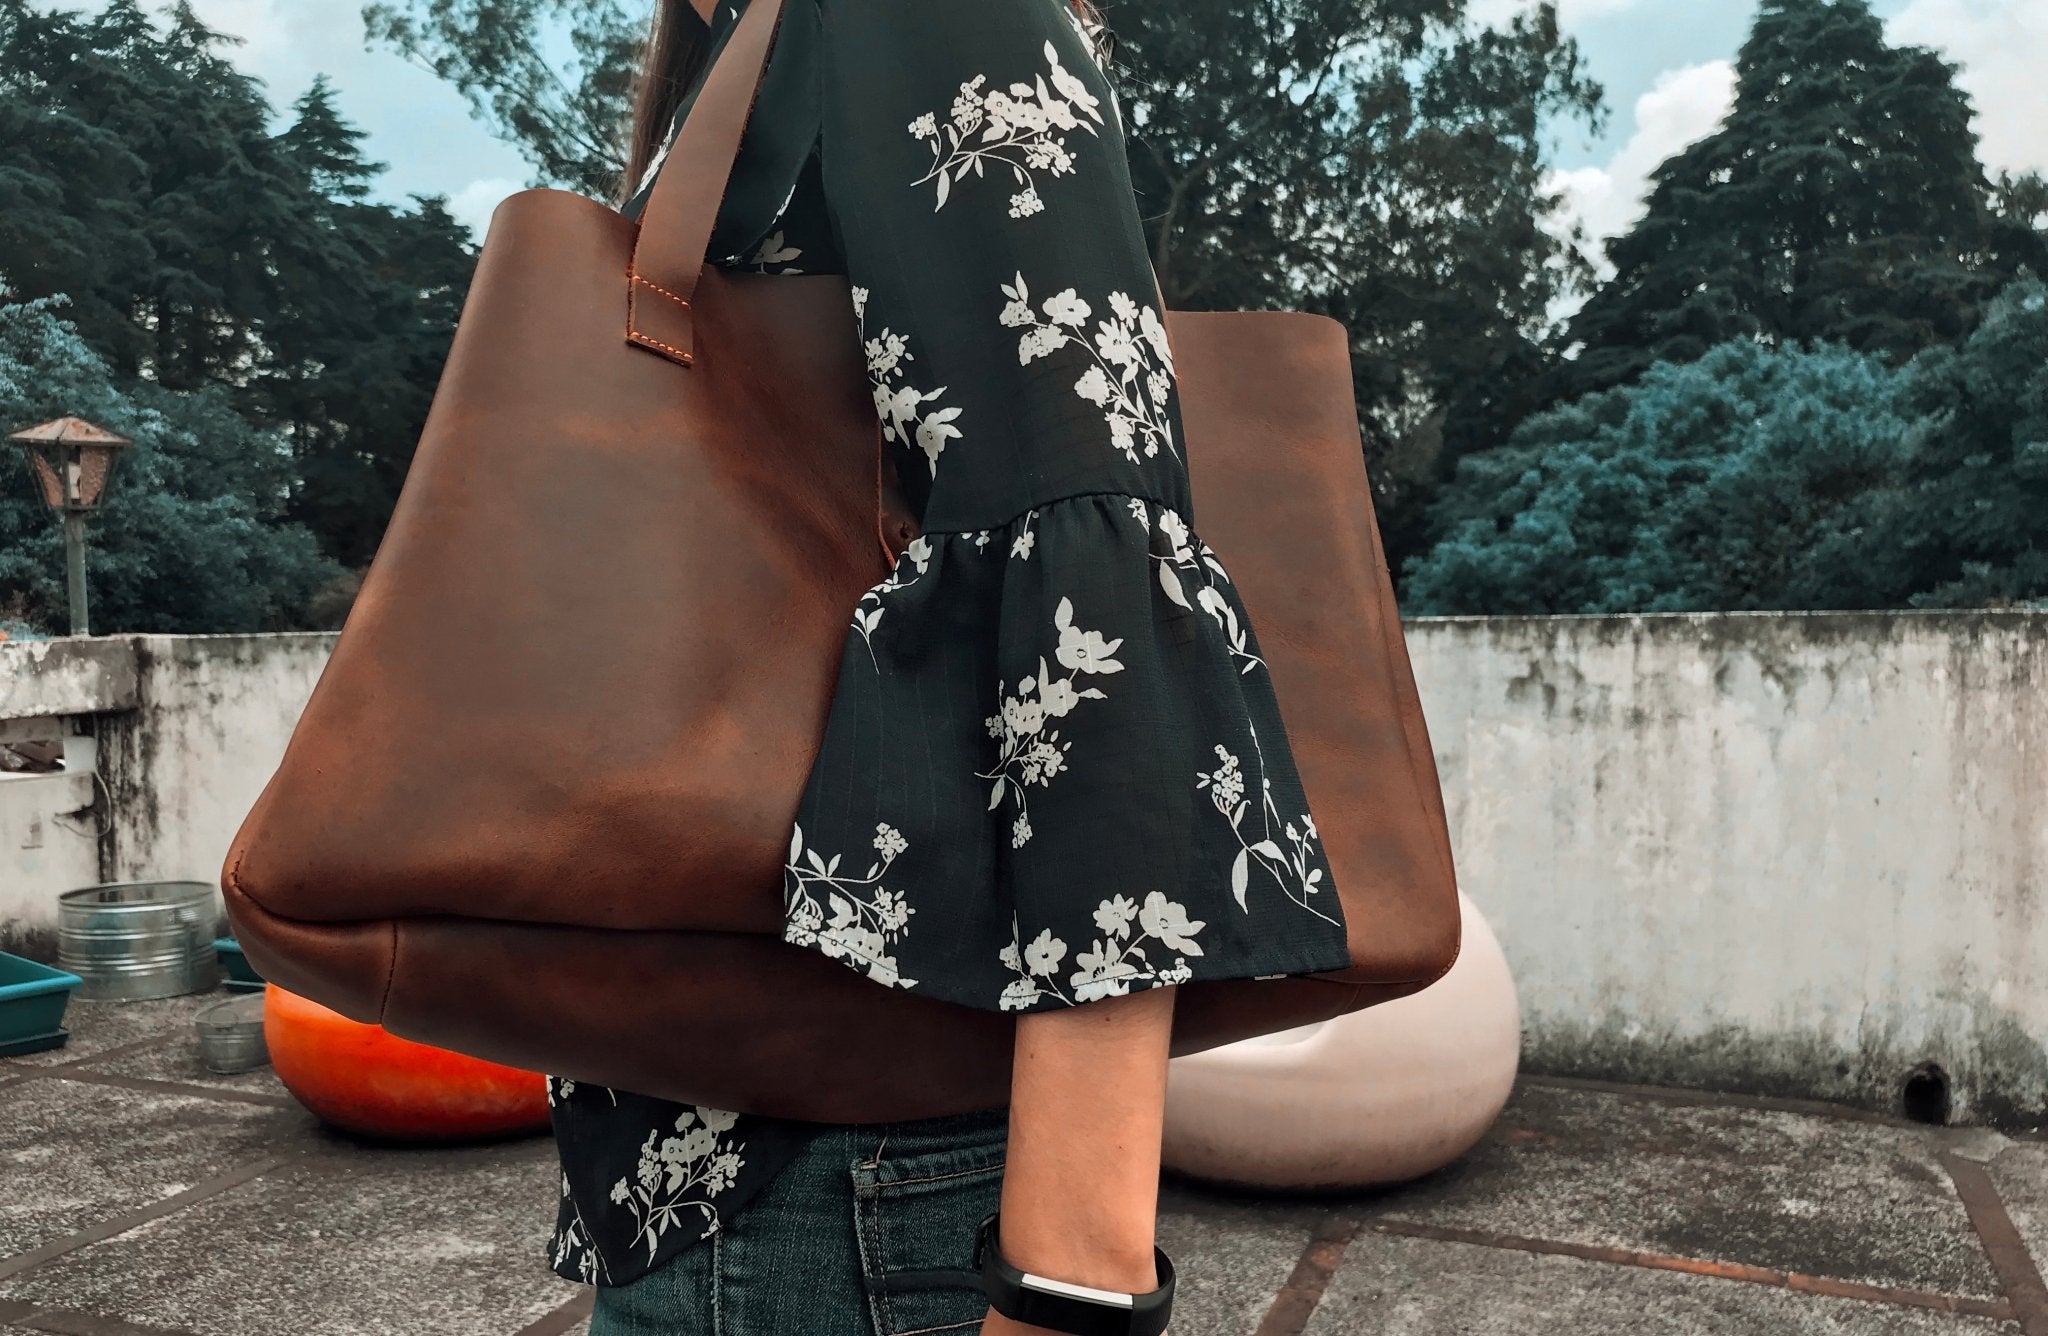 The Tote - SIMPLE Leather Goods